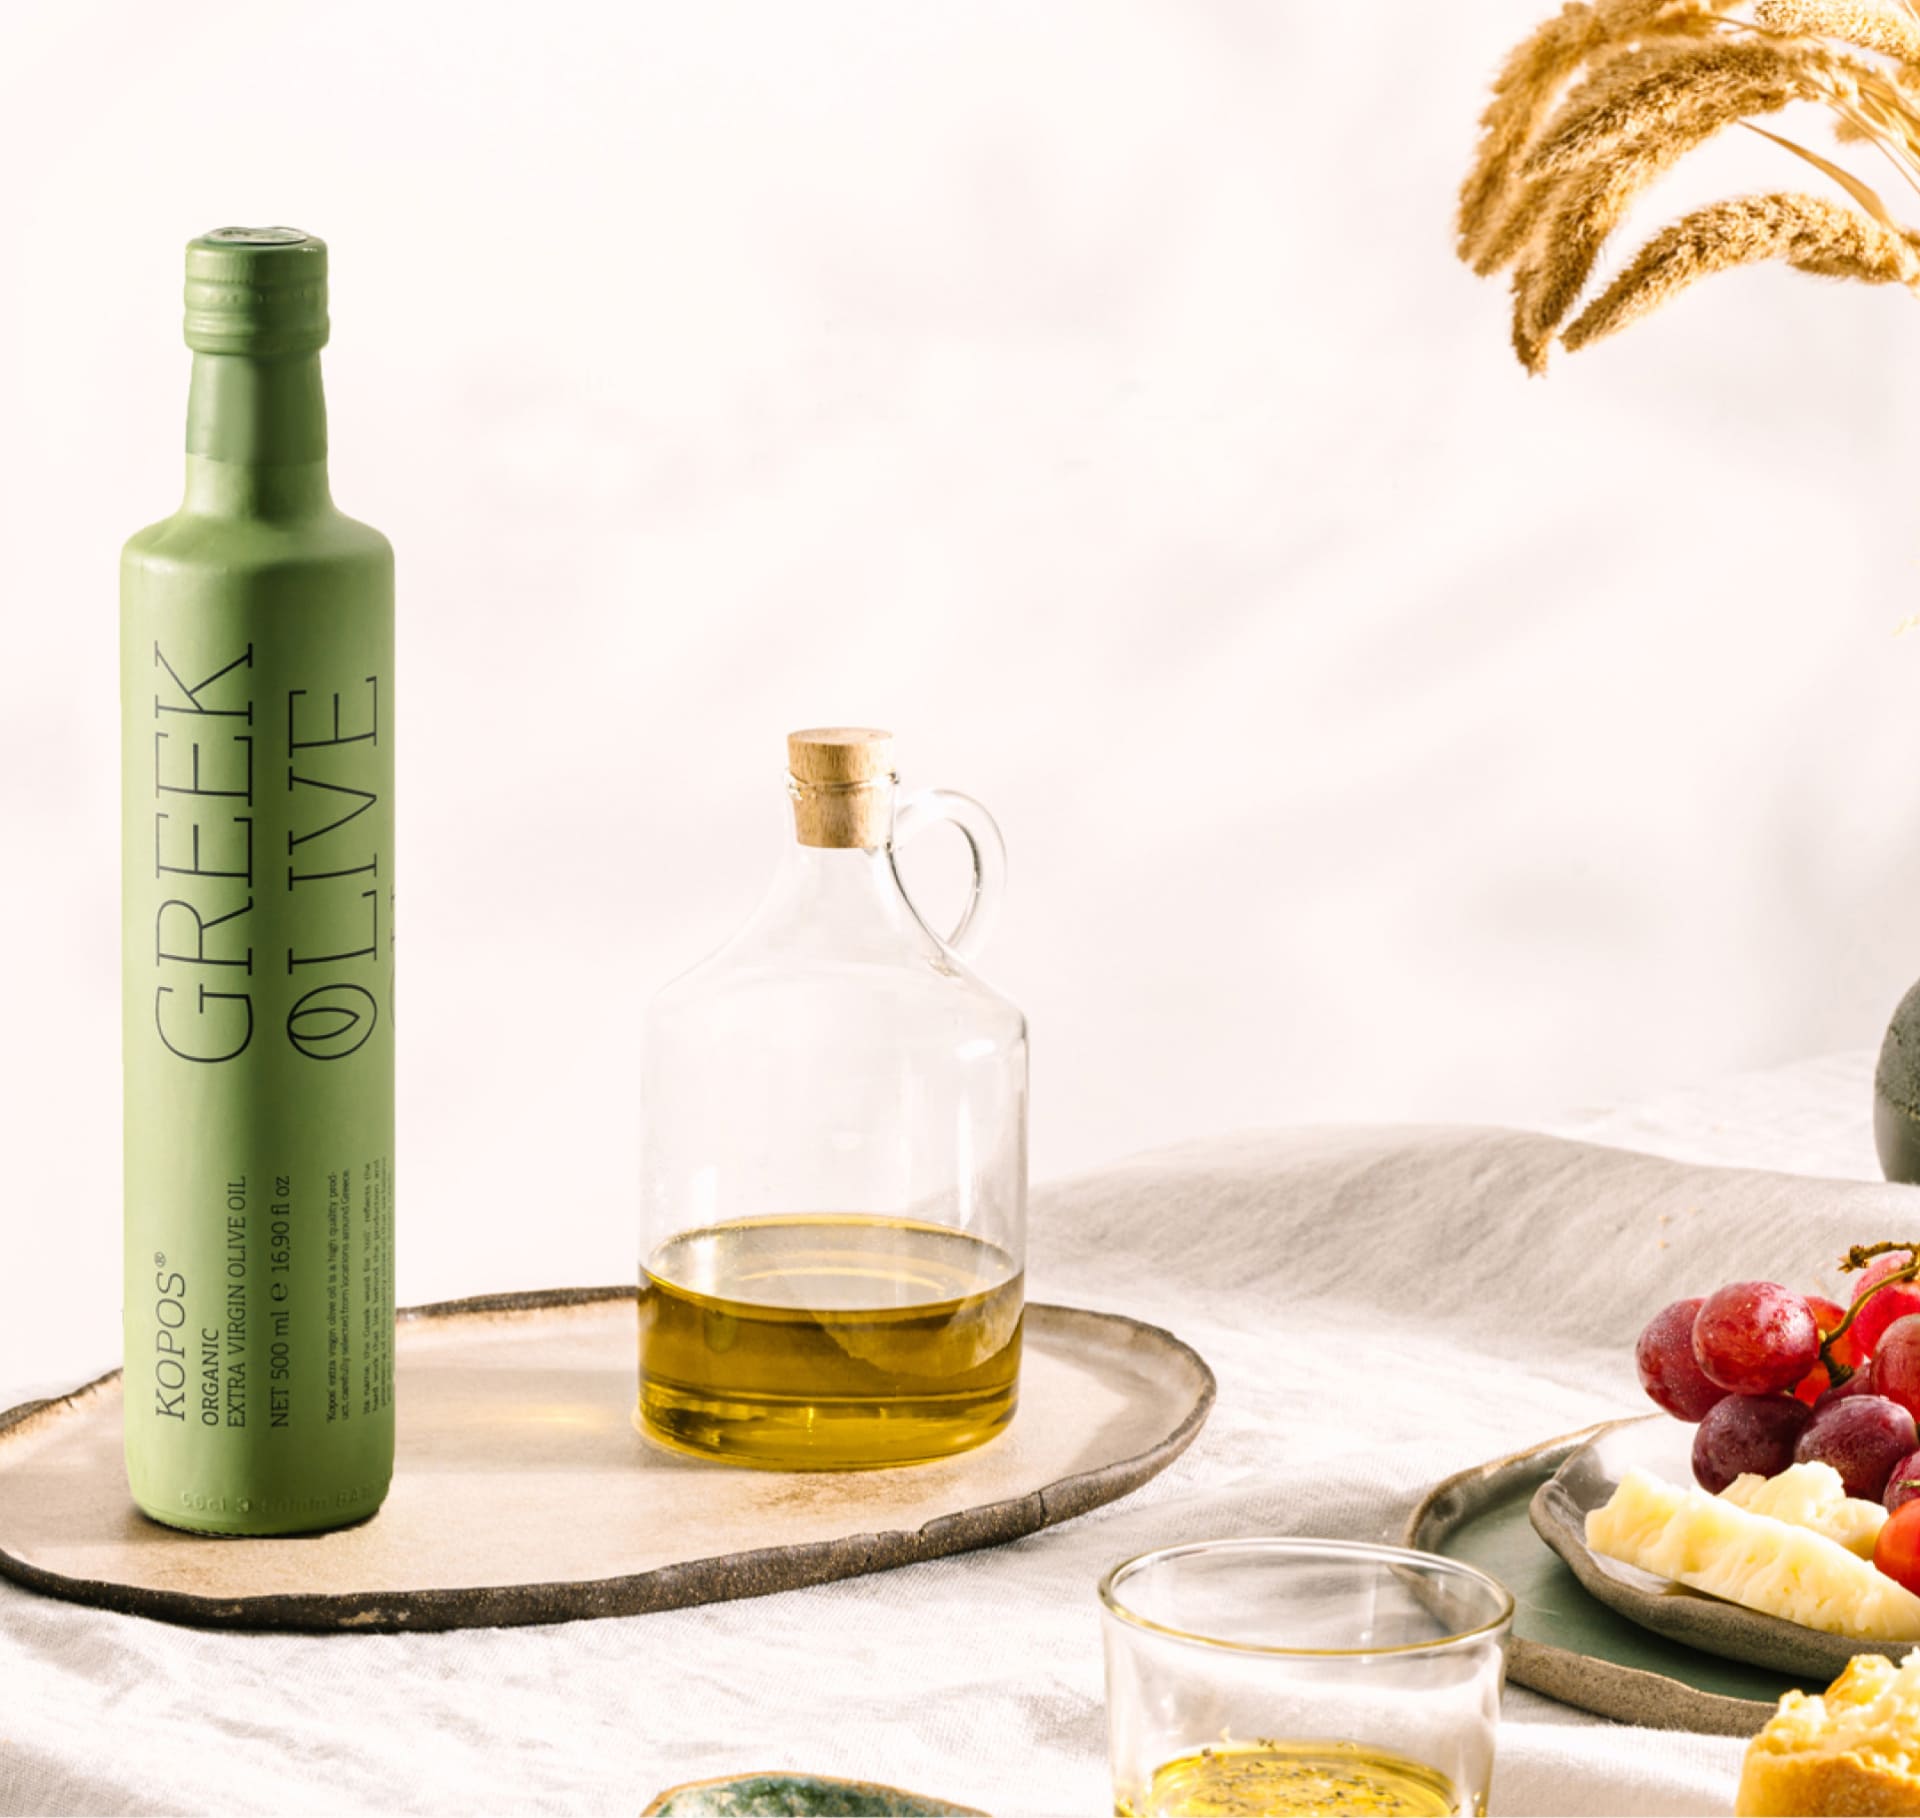 andriotis olive oil blog | Indulge in the ultimate olive oil experience!